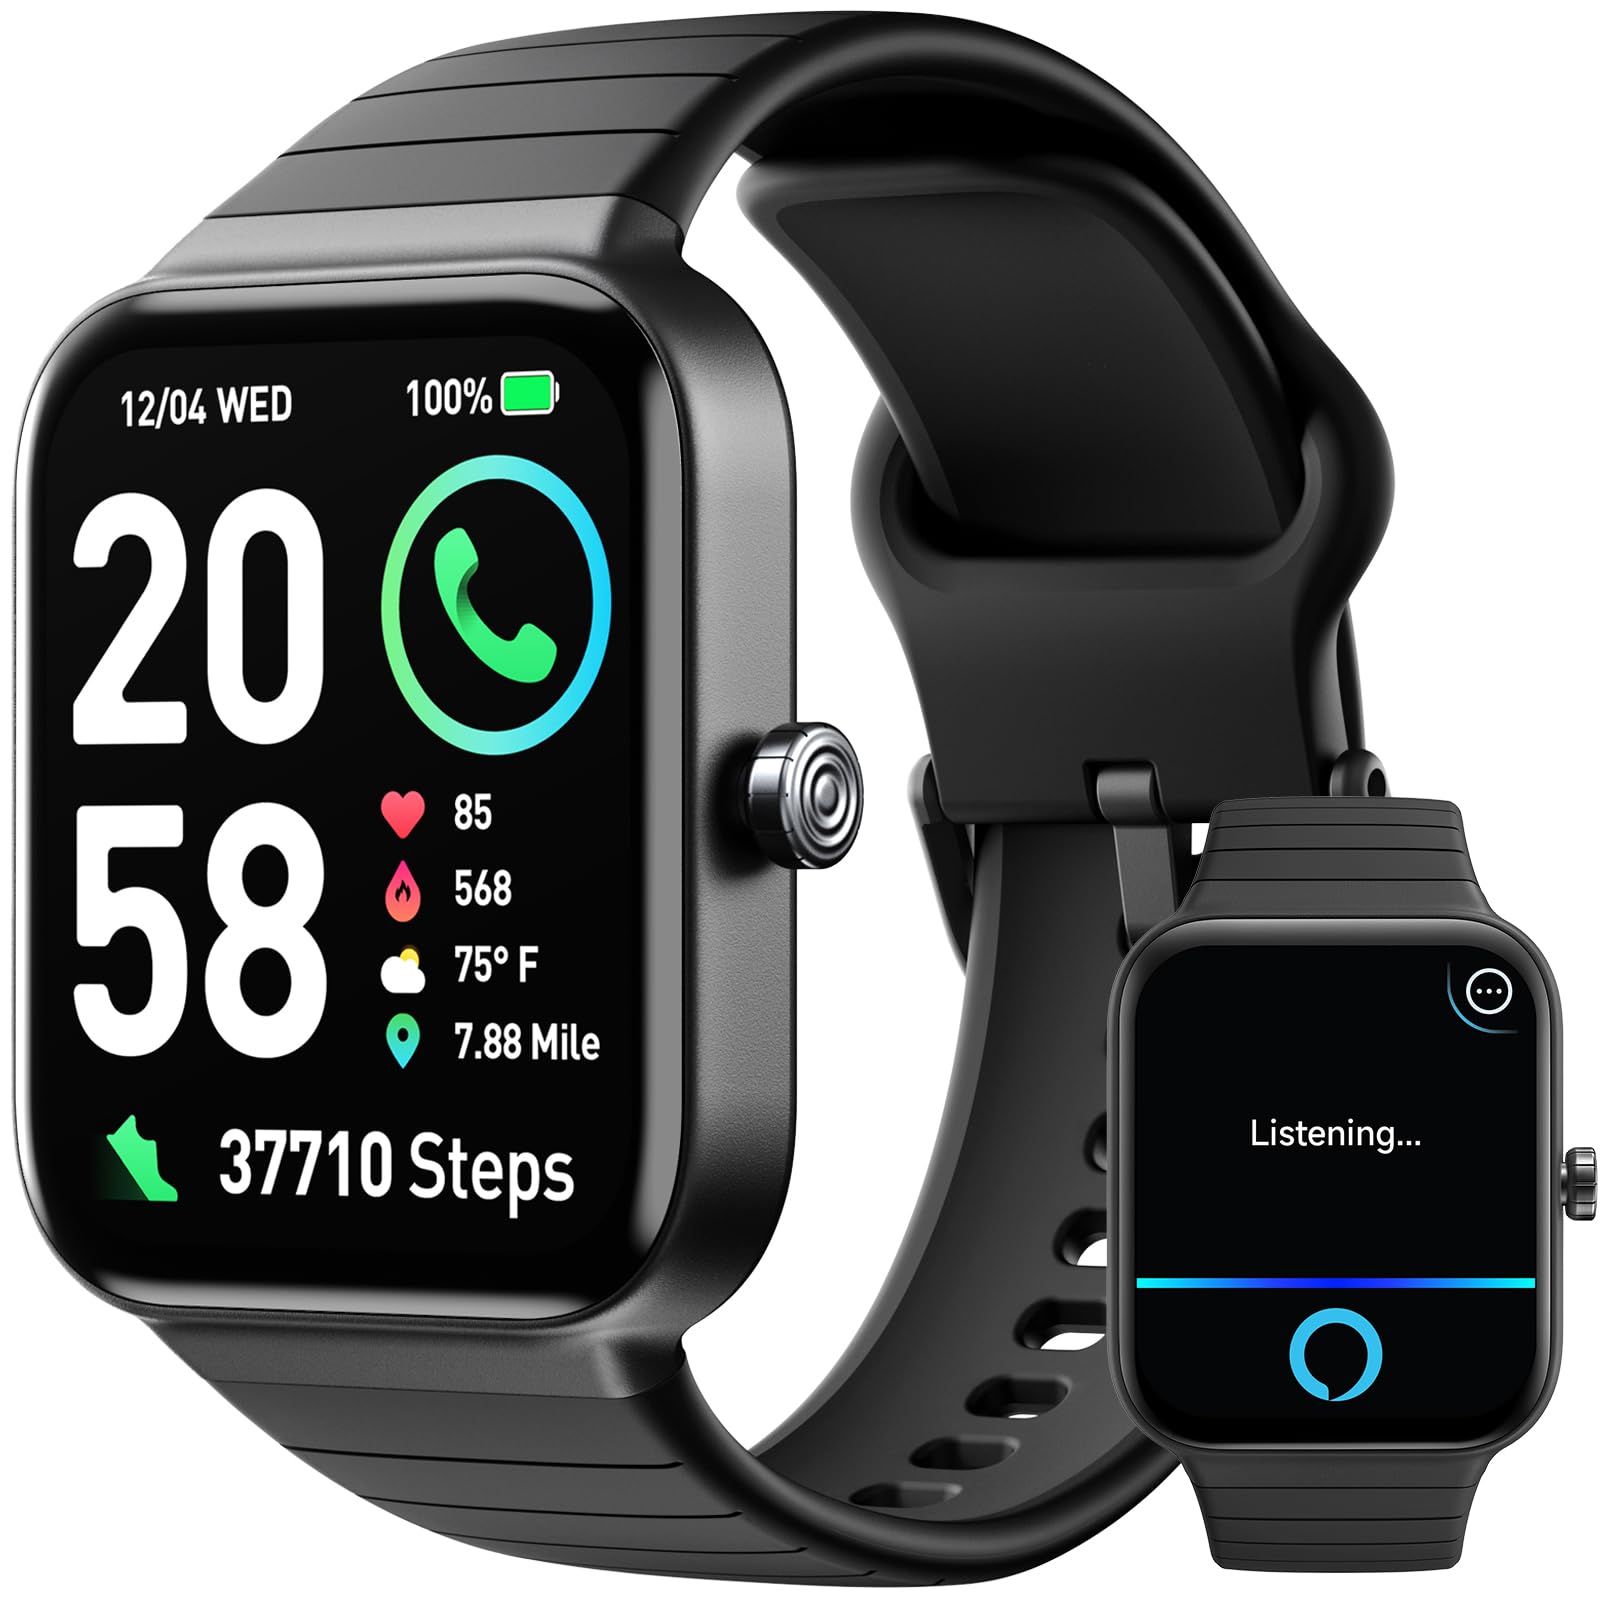 Smart Watch for Men Women(Bluetooth Answer/Make Call), Smartwatch Alexa Built-in, 1.8" Fitness Watch with Heart Rate/SpO2/Sleep Monitor/100 Sports/IP68 Waterproof, Activity Trackers (black)